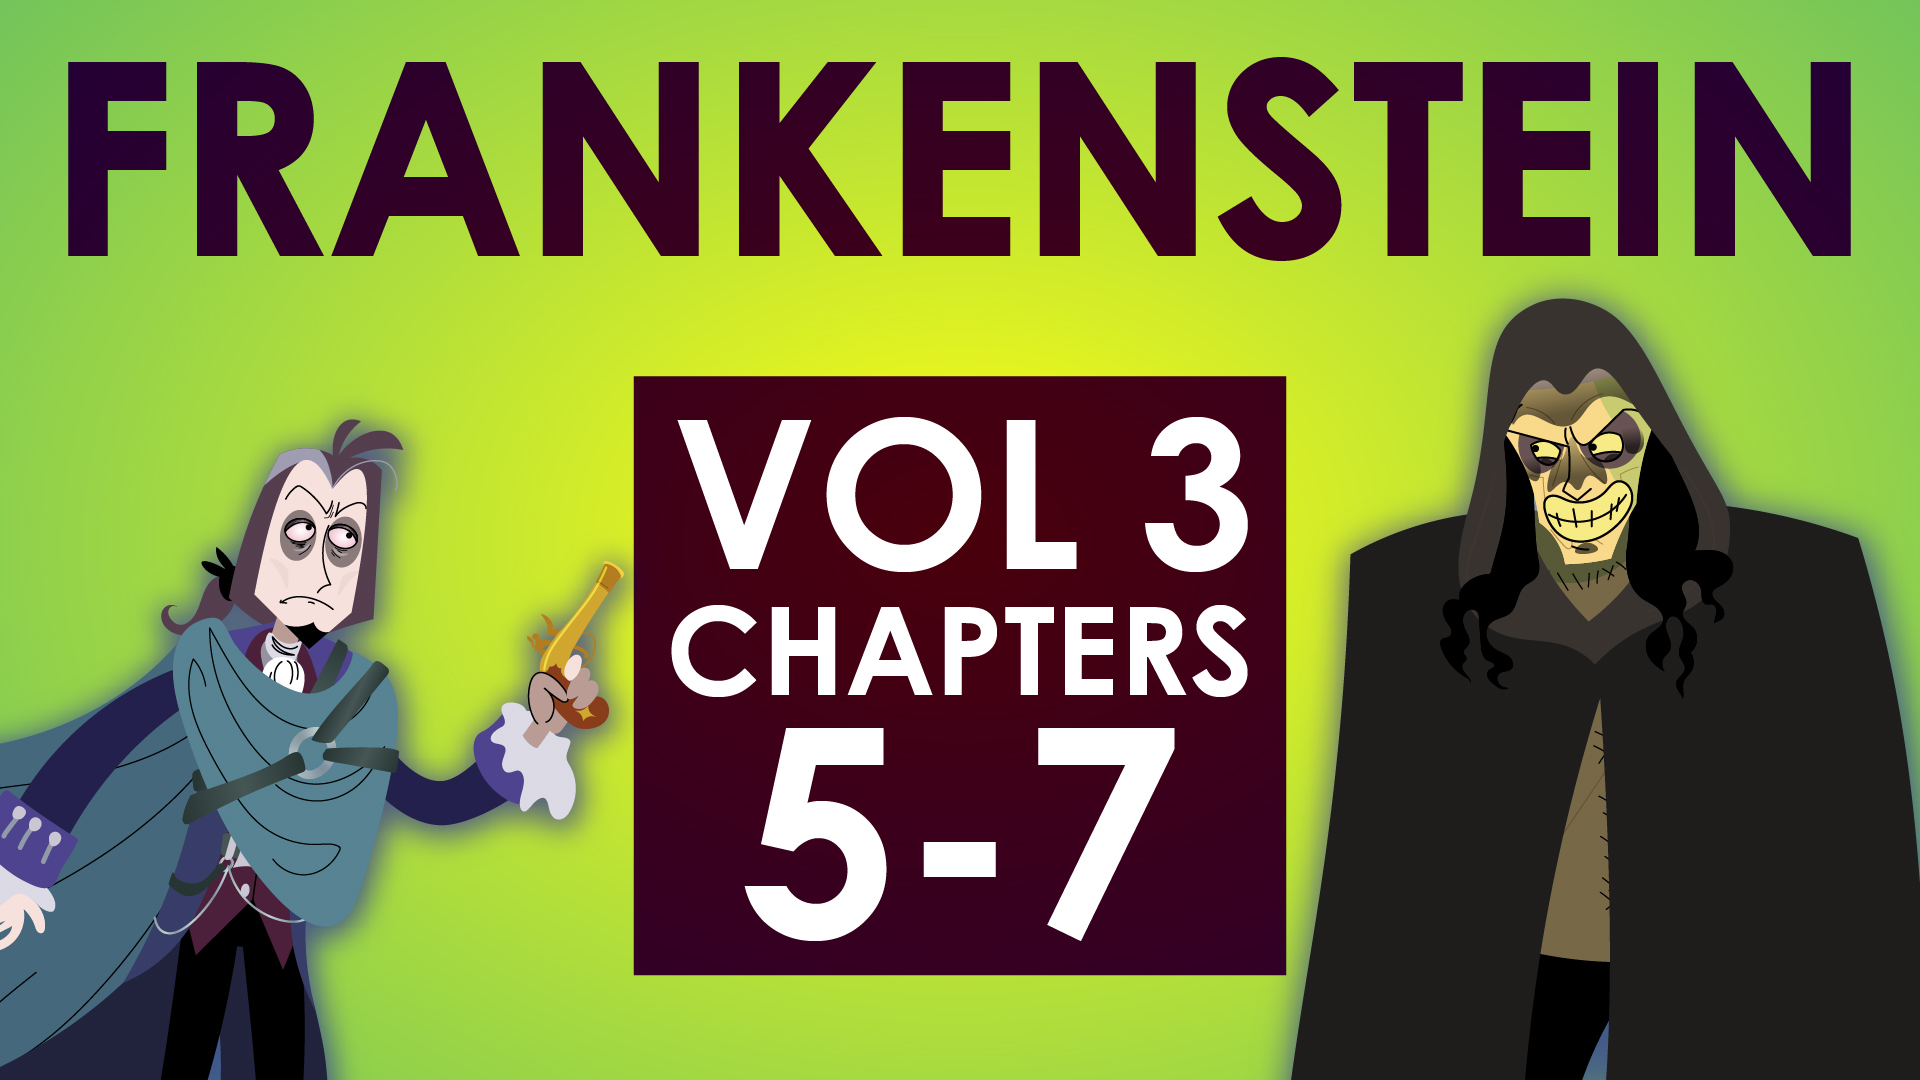 Frankenstein - Mary Shelley - Volume 3 Chapters 5-7 - Powering Through Prose Series	